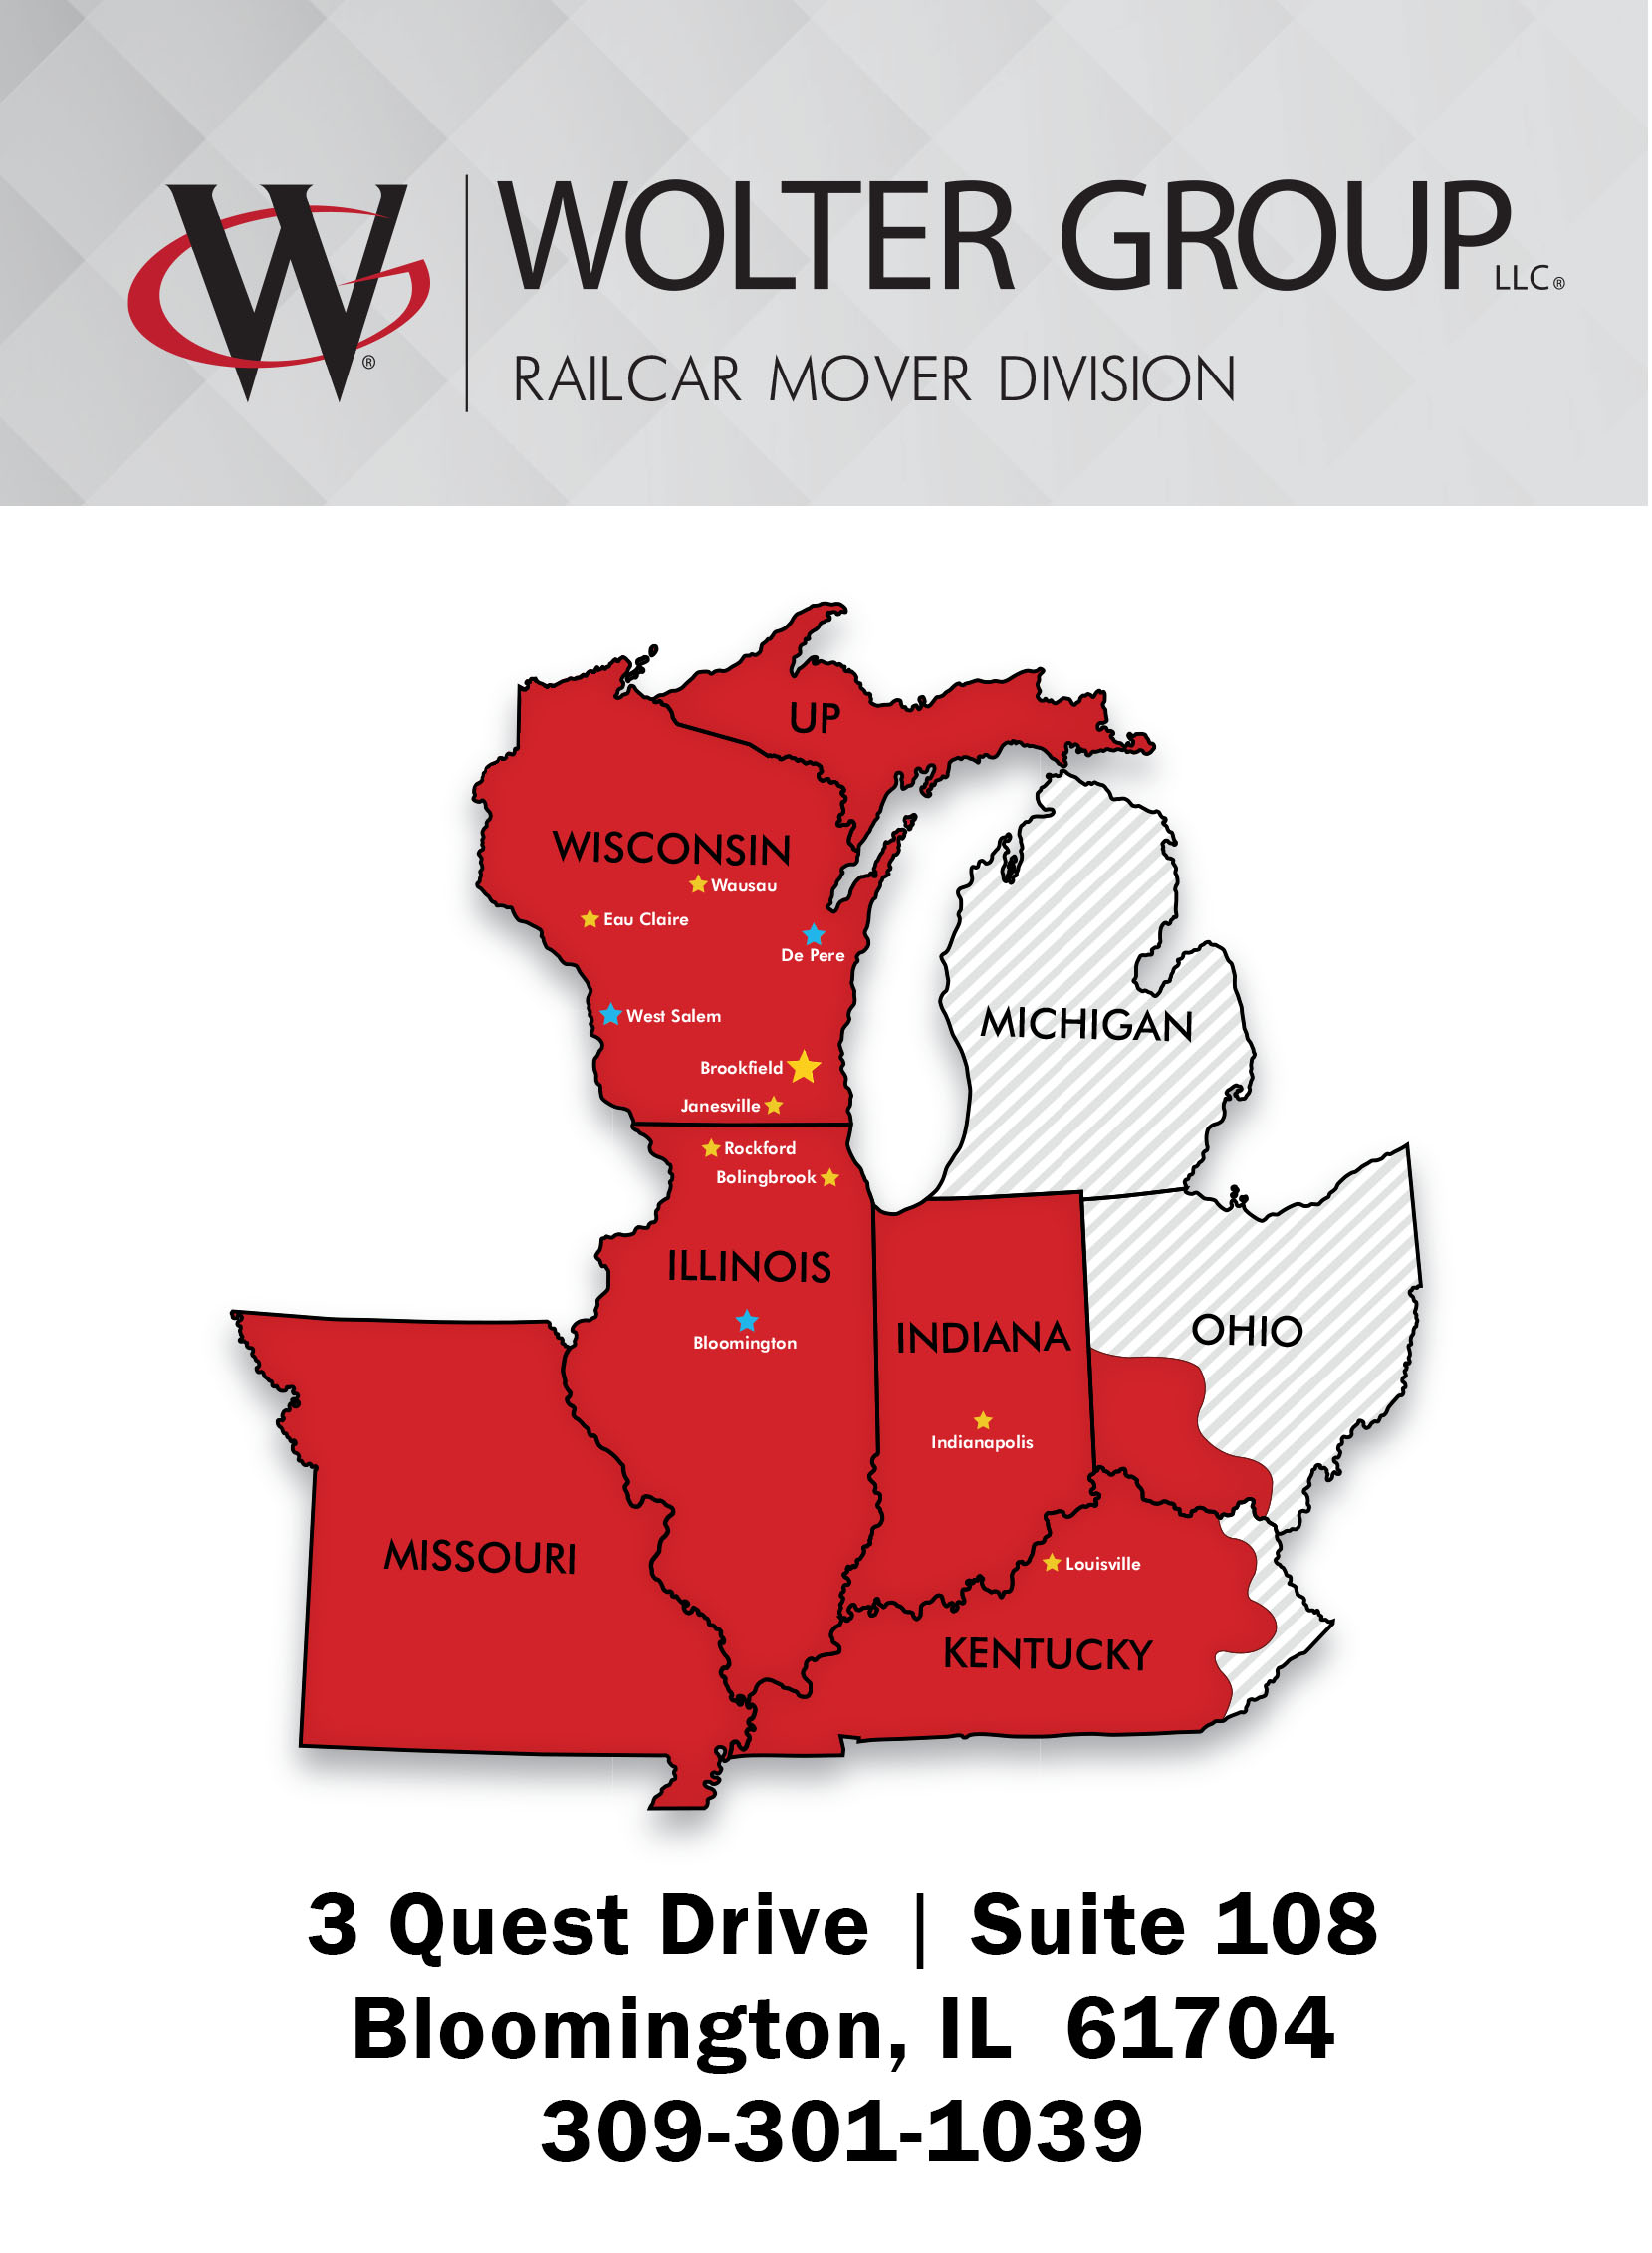 Wolter Group LLC Expands Railcar Mover Services into Bloomington IL